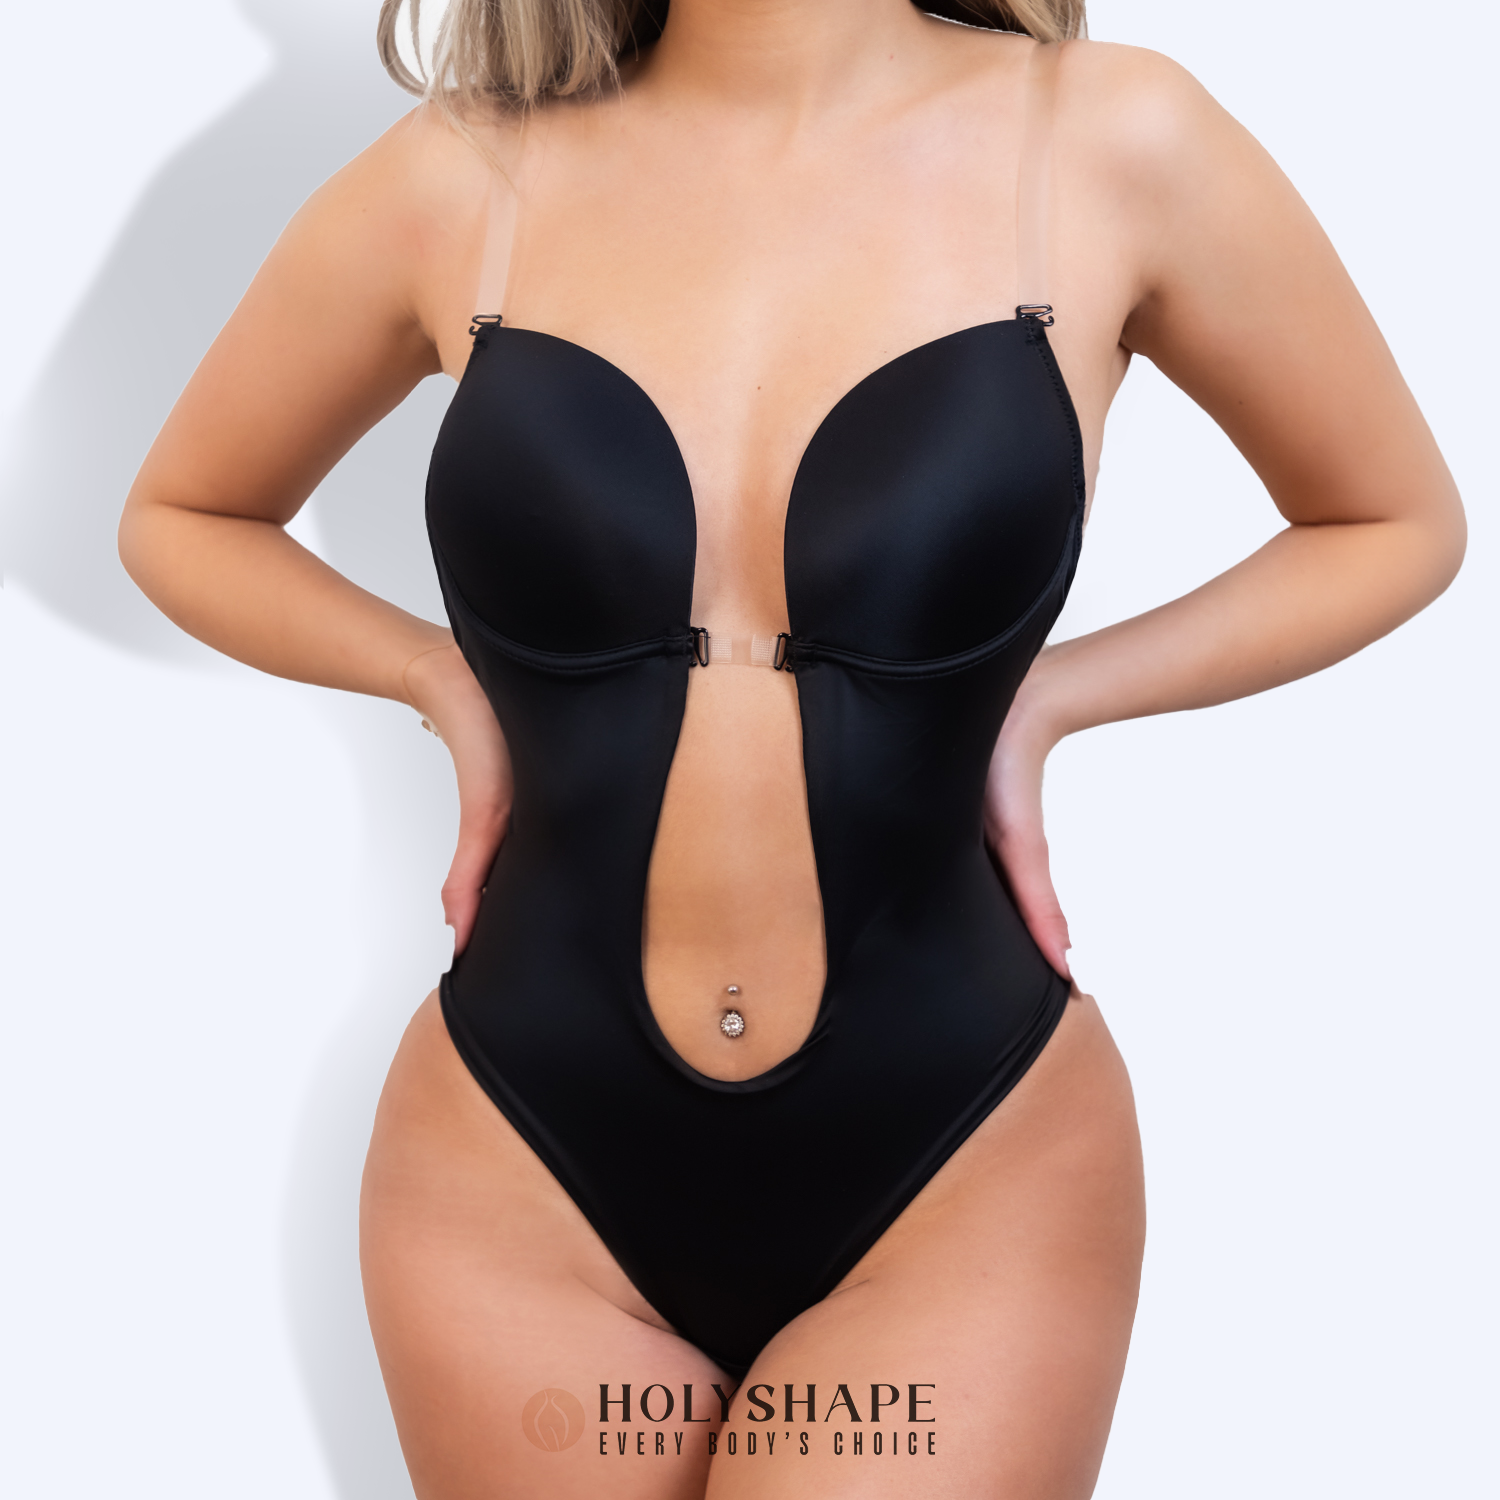 AirSlim® Backless U Plunge Thong Bodysuit is always your best choice! 💕  3XL fits well!🙌 #Shapellxofficial #AirSlim #fashionnovacurve  #shapellxcurve